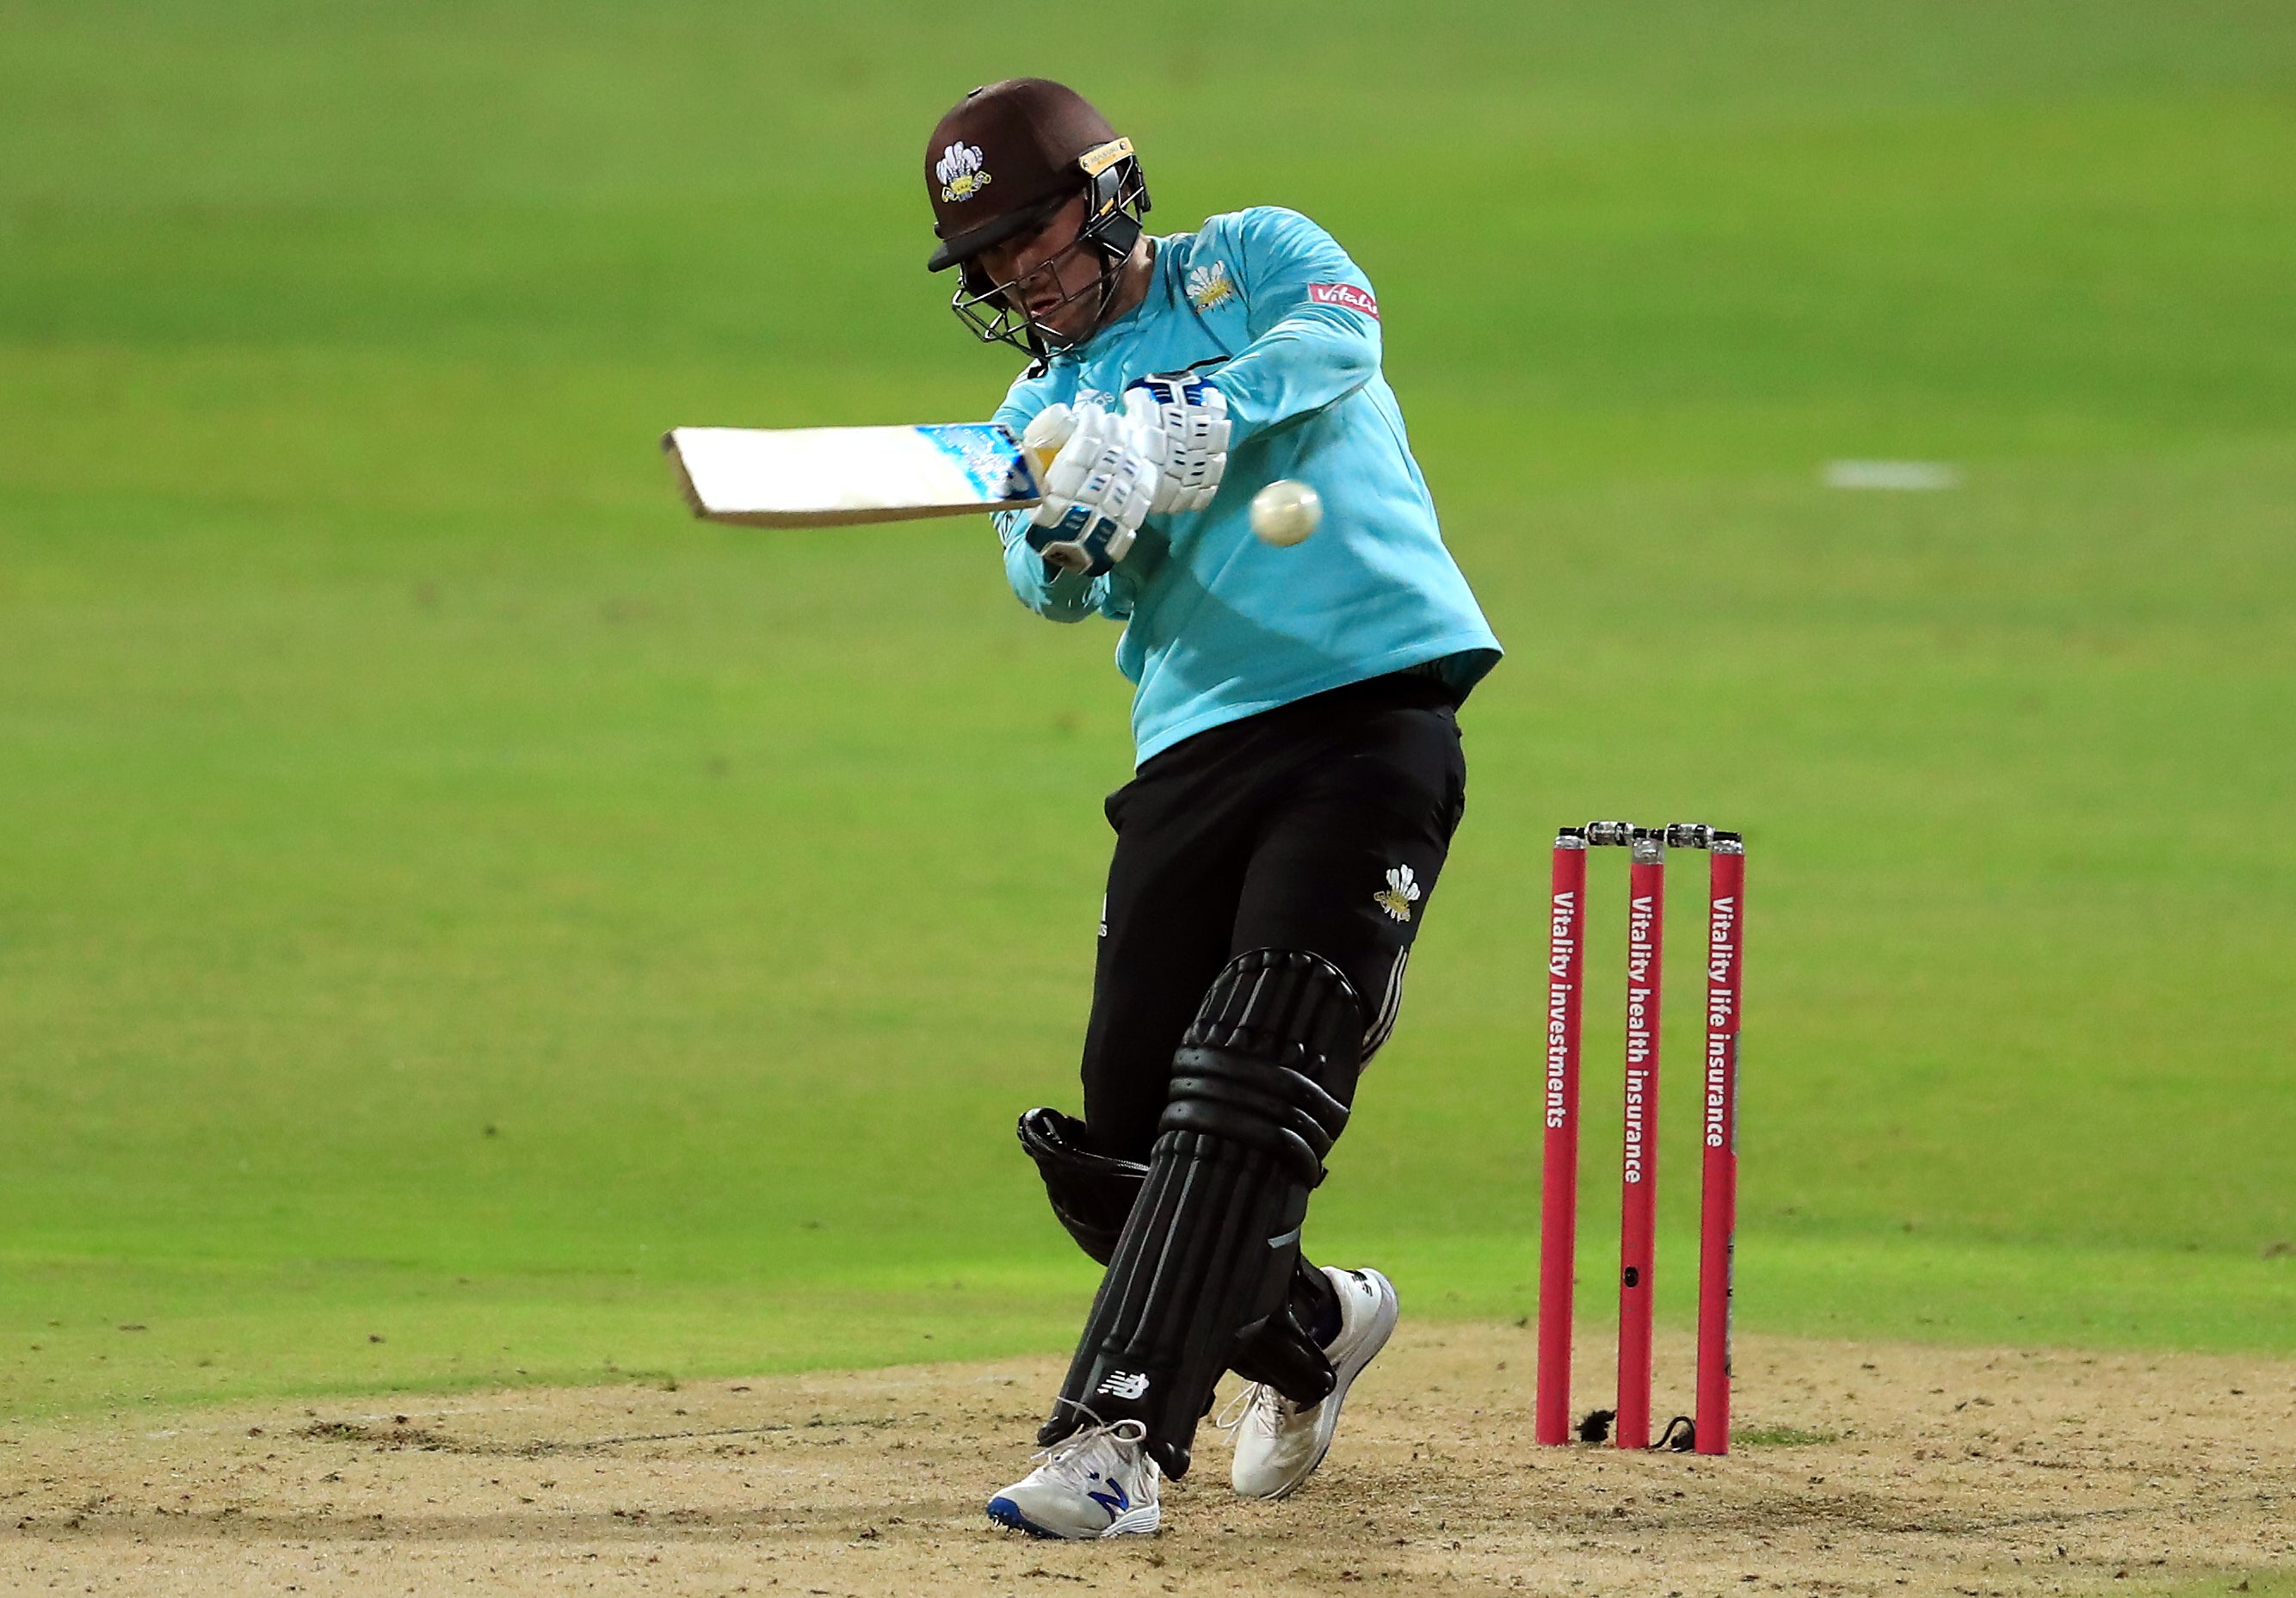 Surrey’s Jason Roy was in fine form at Lord’s (Mike Egerton/PA)